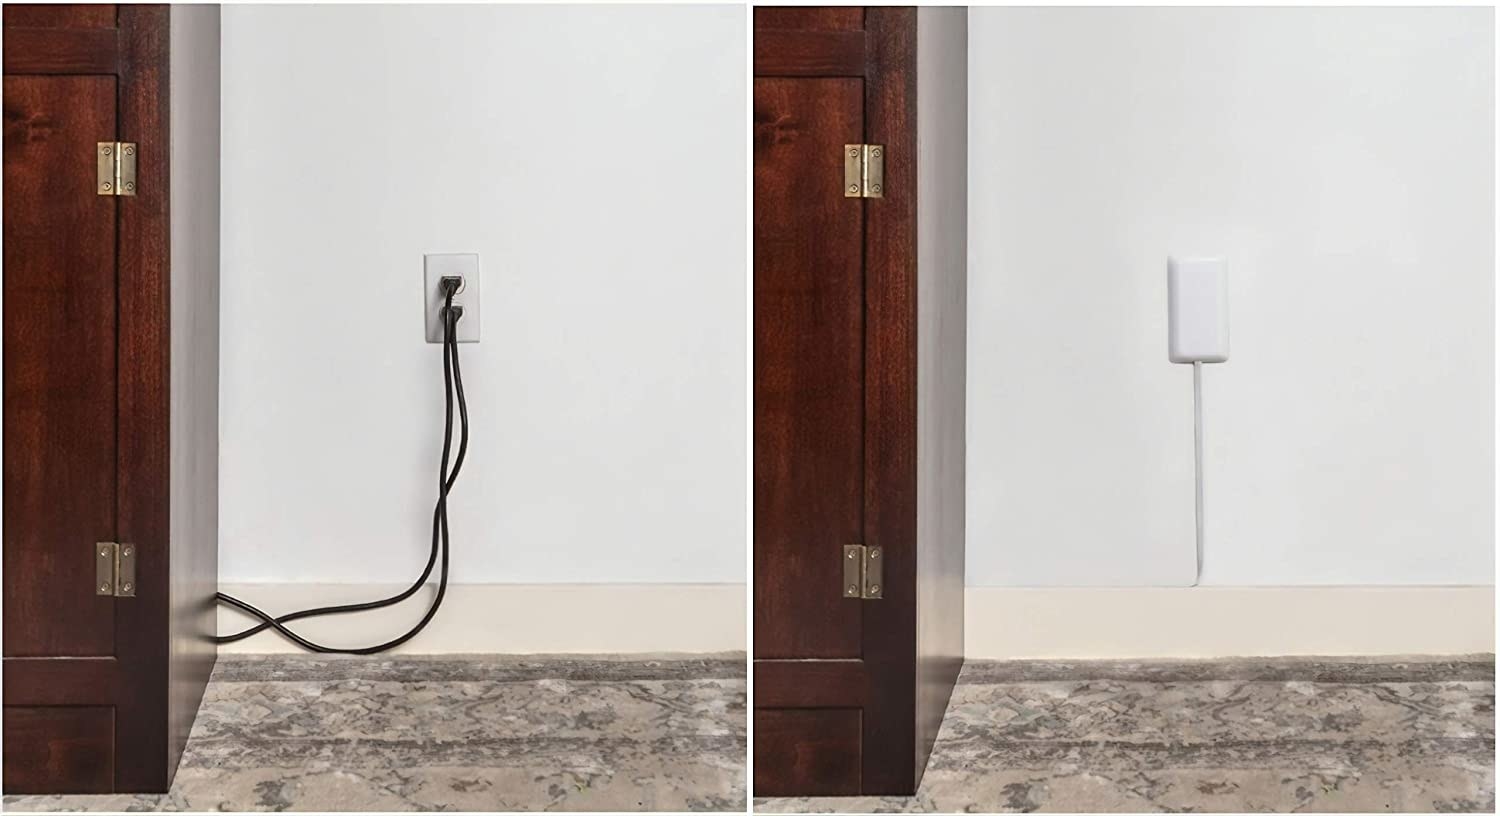 a before and after photo where the after shows a sleek plug that is nearly invisible under the outlet cover